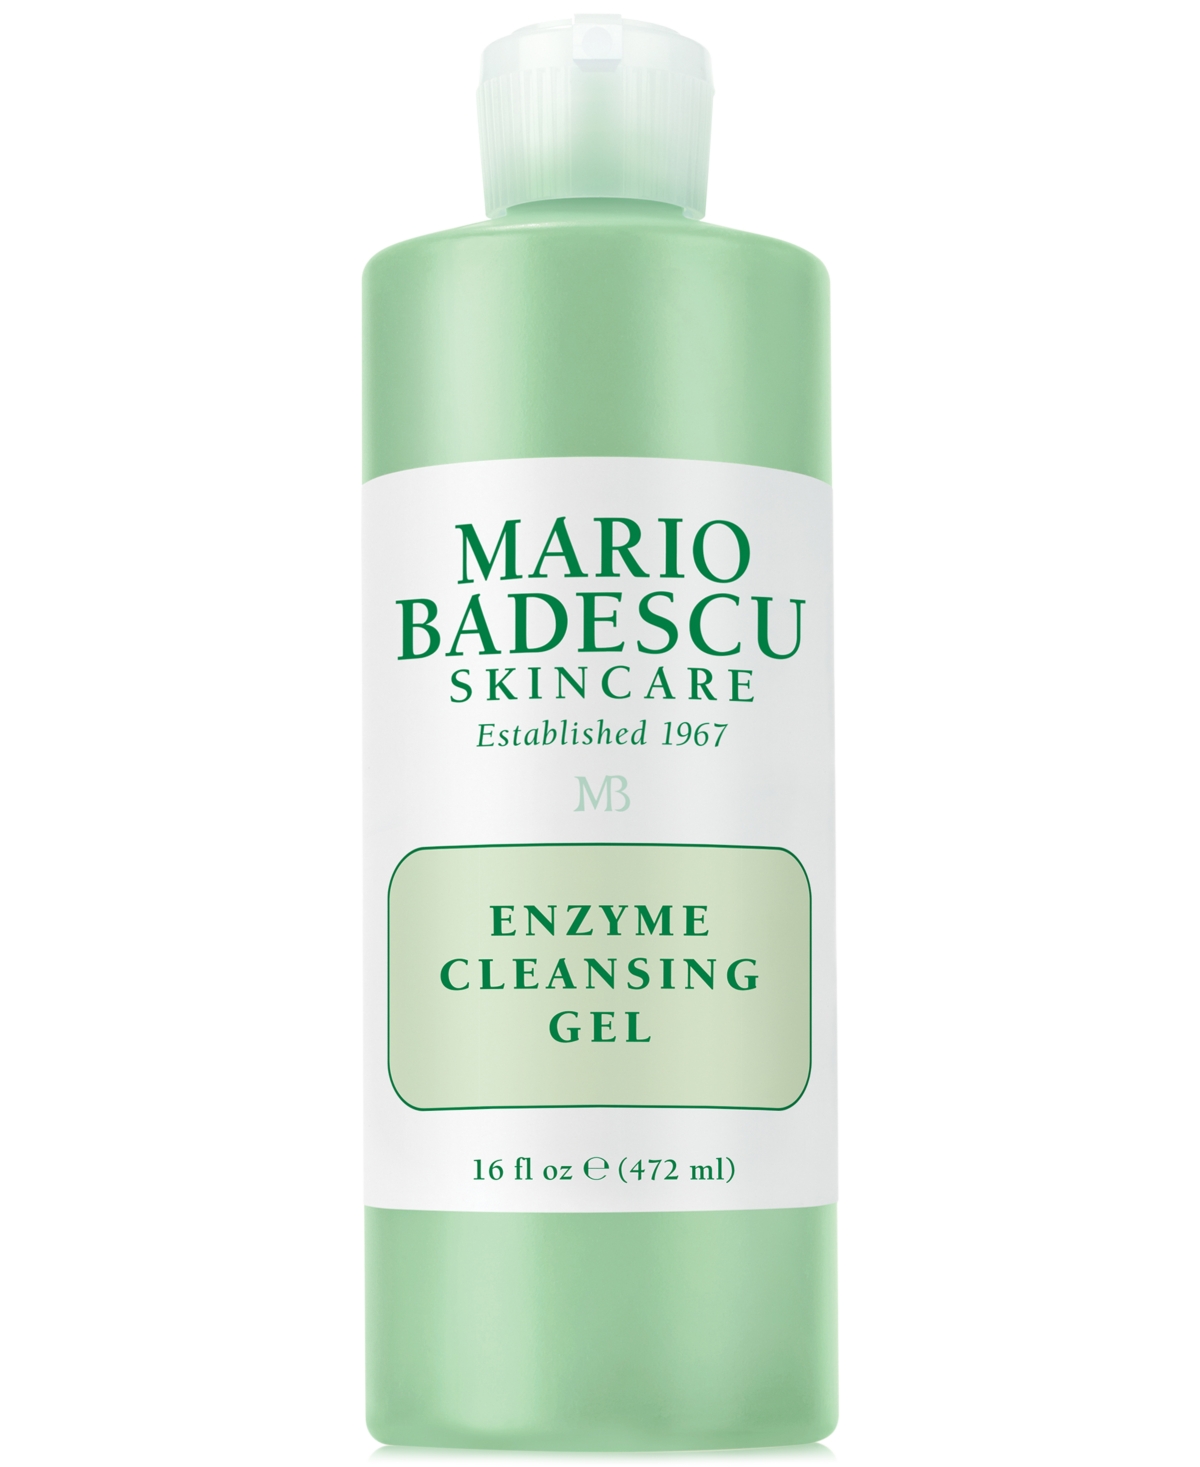 UPC 785364010086 product image for Mario Badescu Enzyme Cleansing Gel, 16-oz. | upcitemdb.com